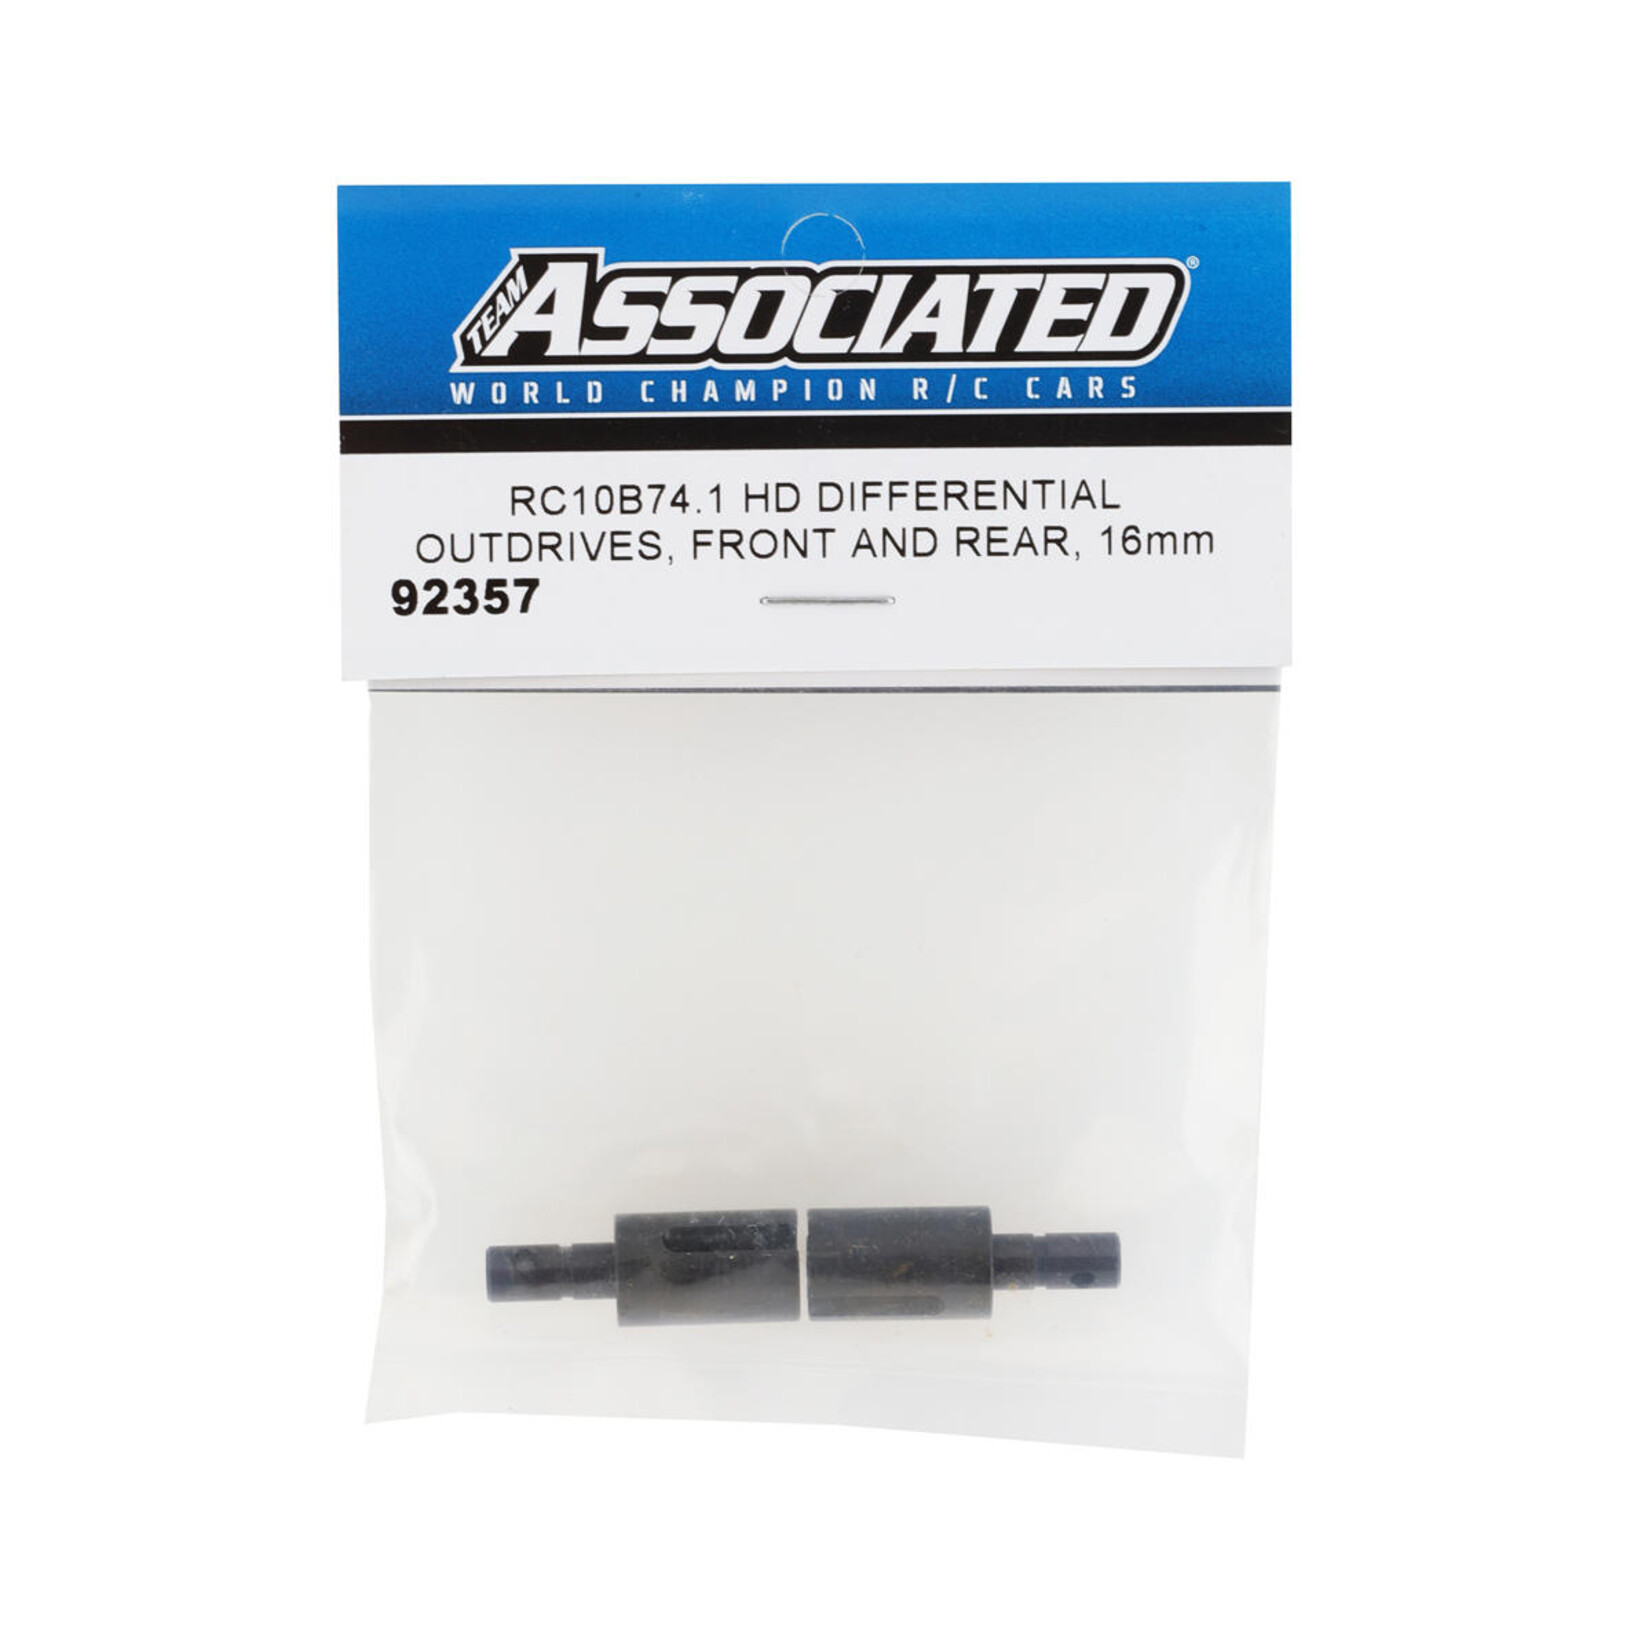 Team Associated RC10B74 HD Differential Outdrives (2) #92357